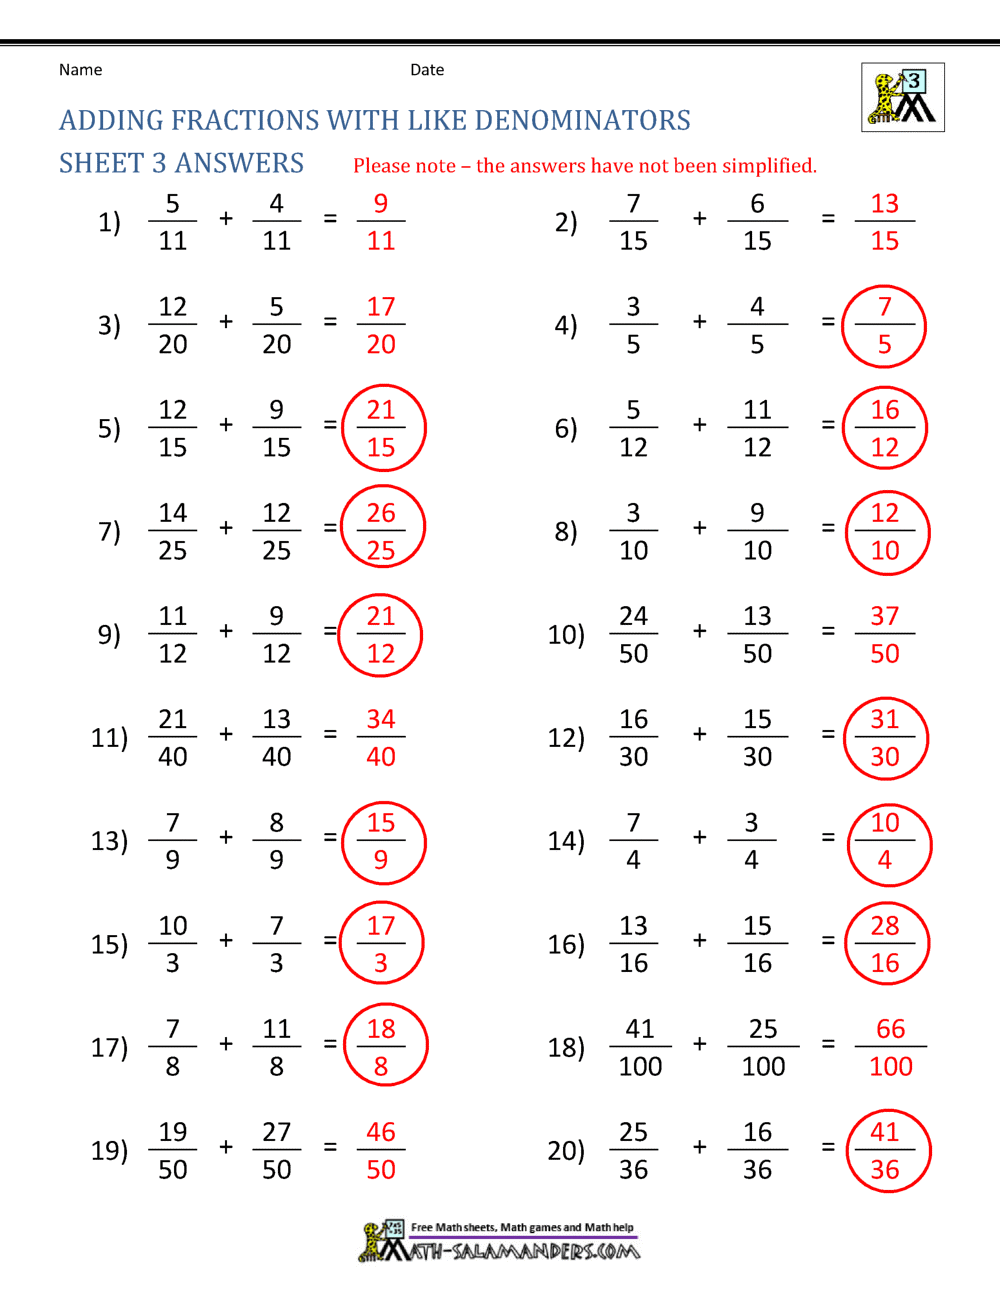 Adding Fractions With Like Denominators Worksheets Within Adding Fractions Worksheet Pdf